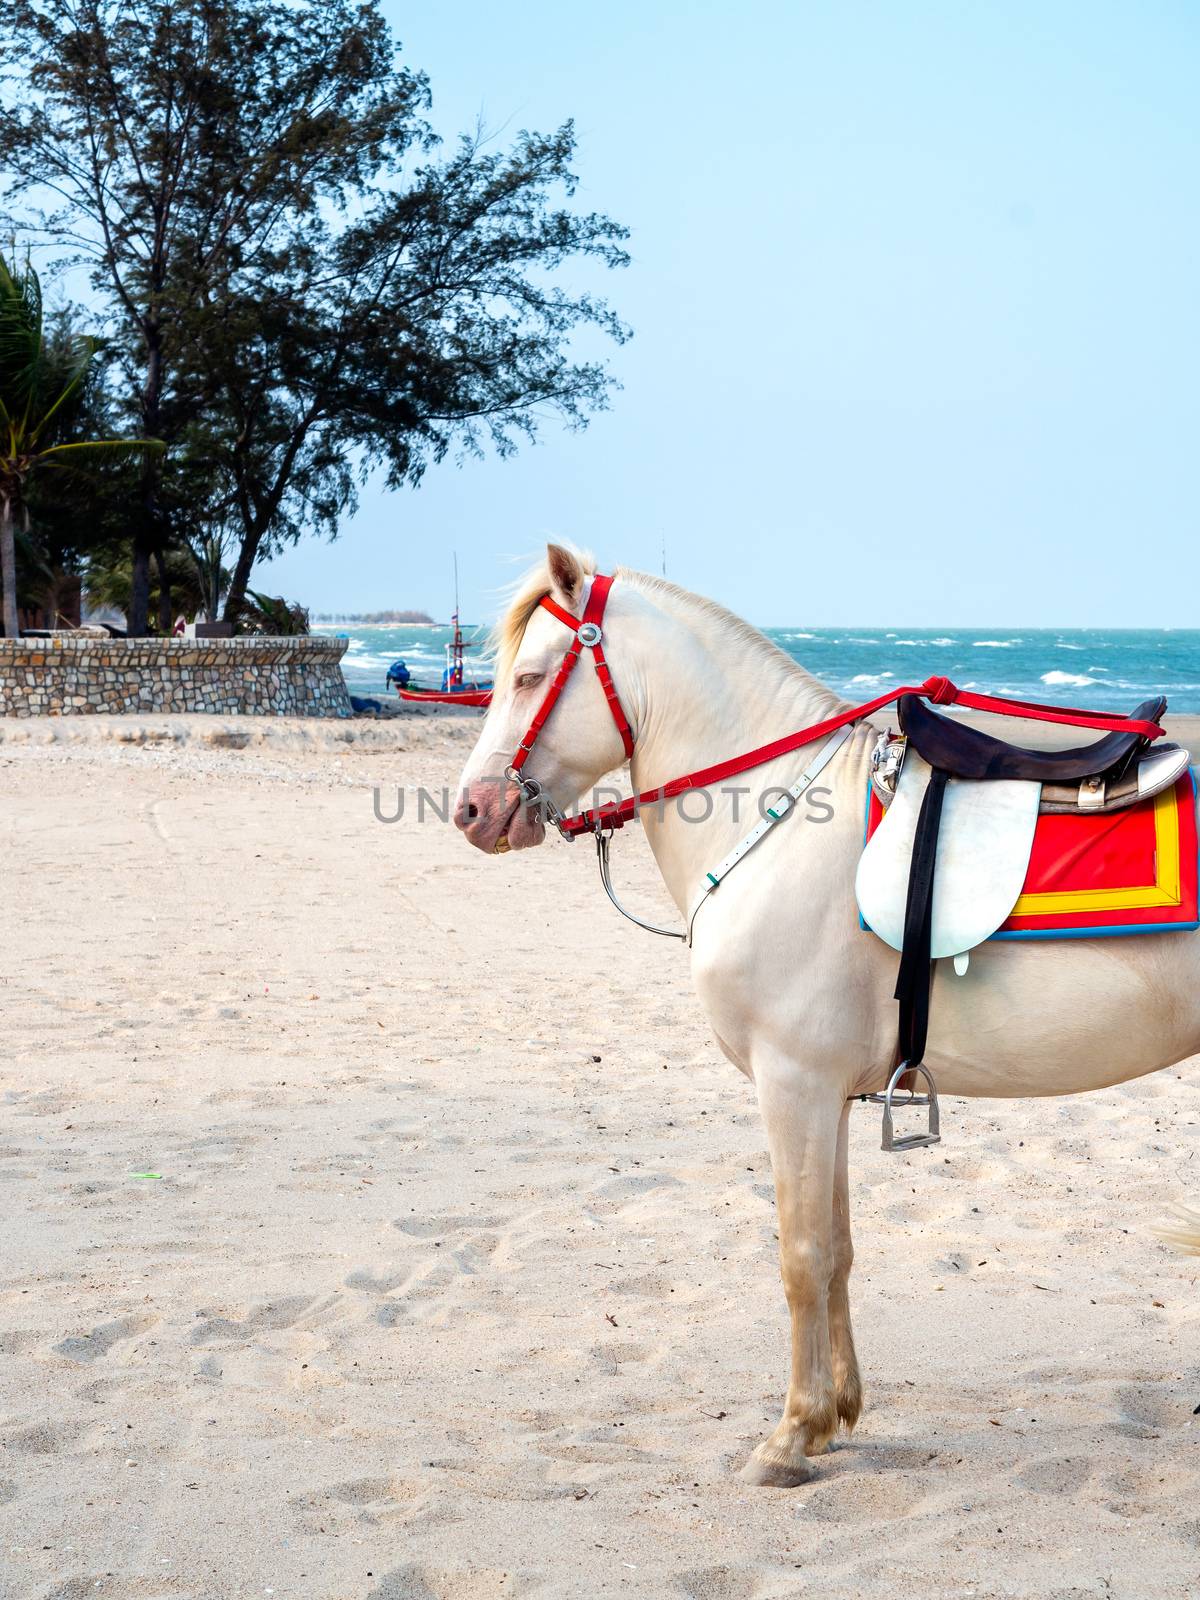 Beautiful white horse on the sand beach, service for tourist in Hua-Hin, Thailand, vertical style.